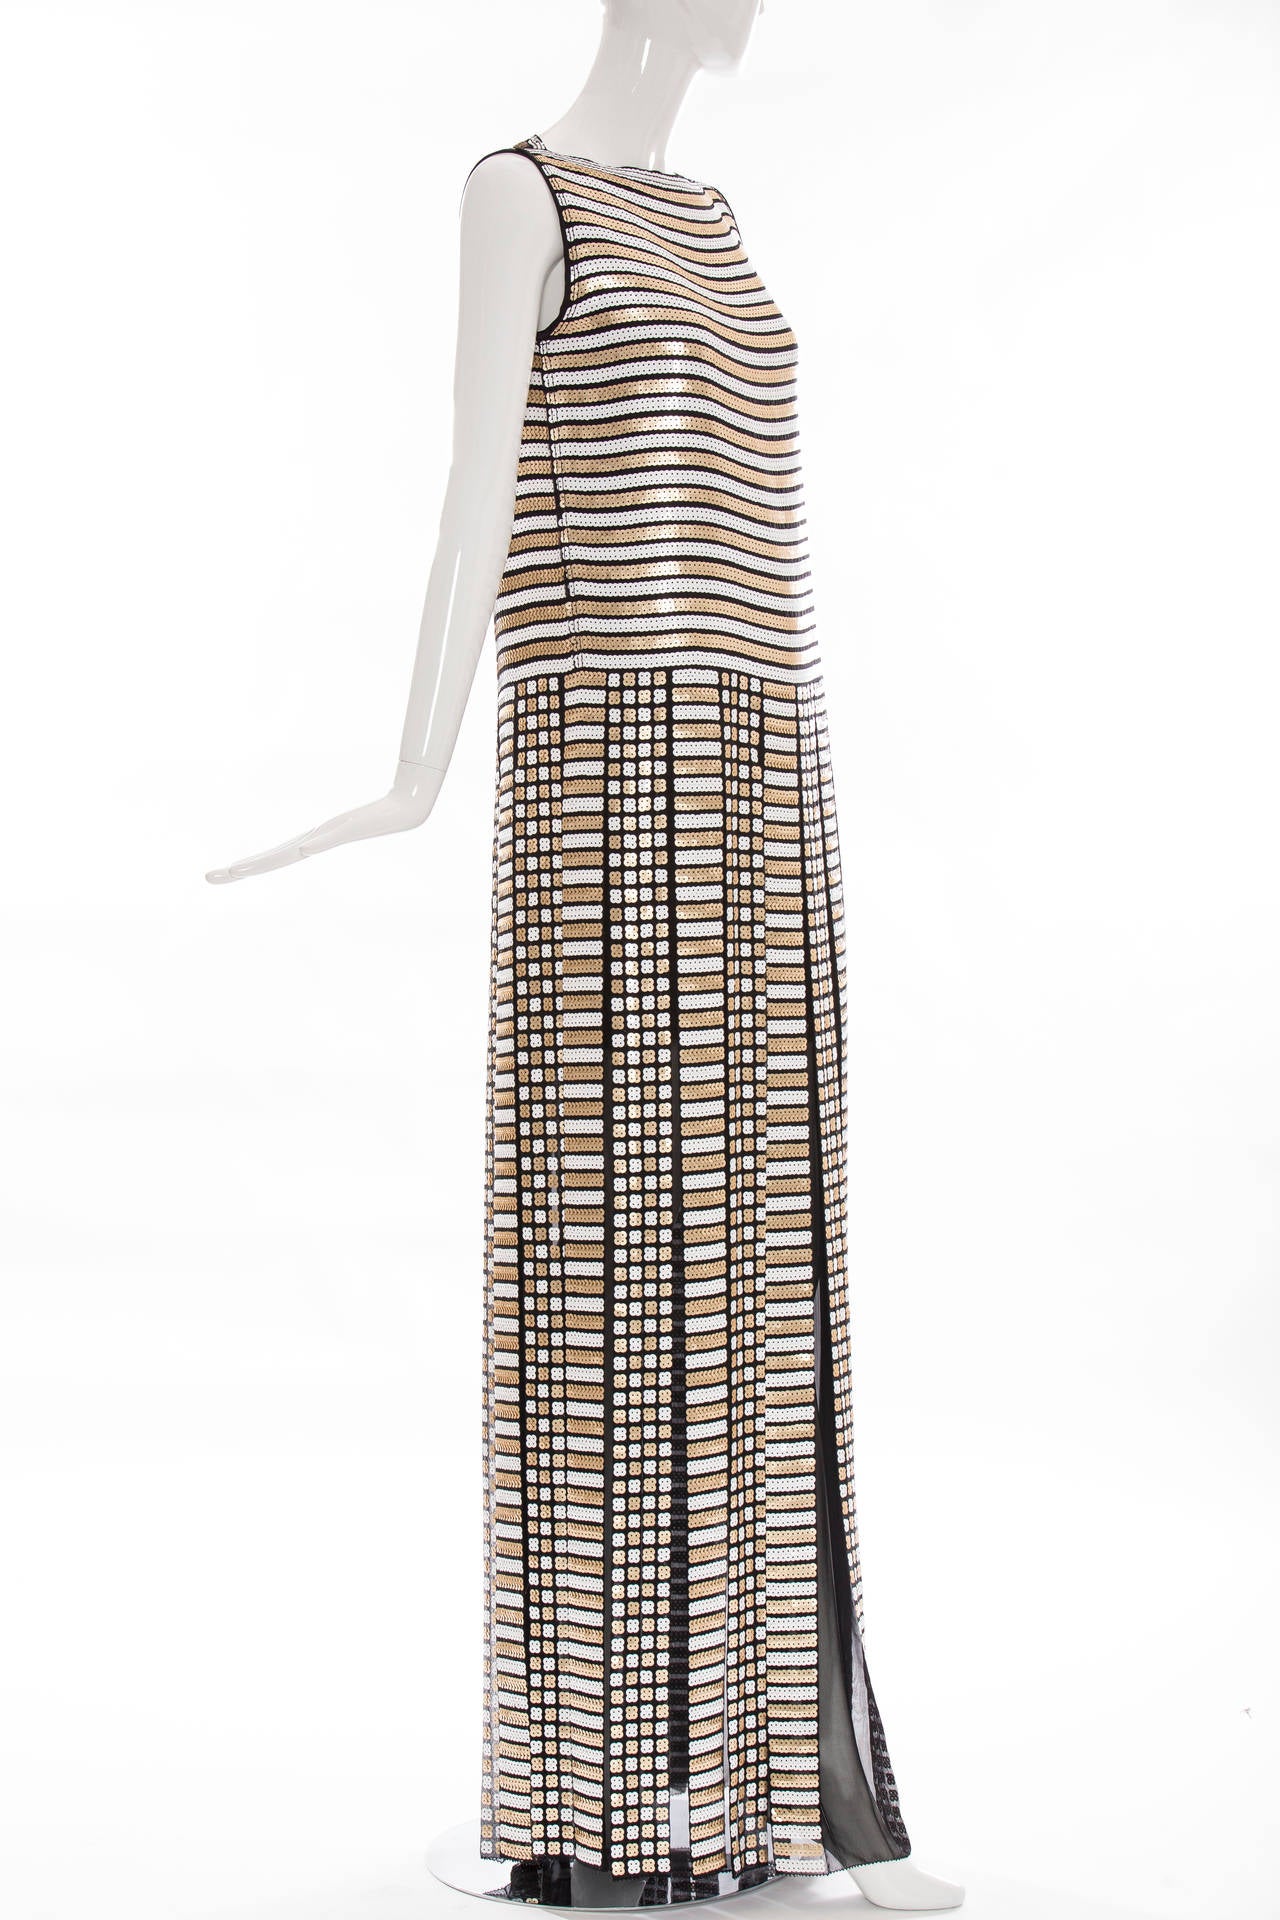 Marc Jacobs Spring 2013, black, white and metallic sequin sleeveless evening dress with pleated skirt featuring peek-a-boo silk detail and concealed zip closure at center back.

US 6
Bust 36”, Waist 38”, Hip 40.5”, Length 62”